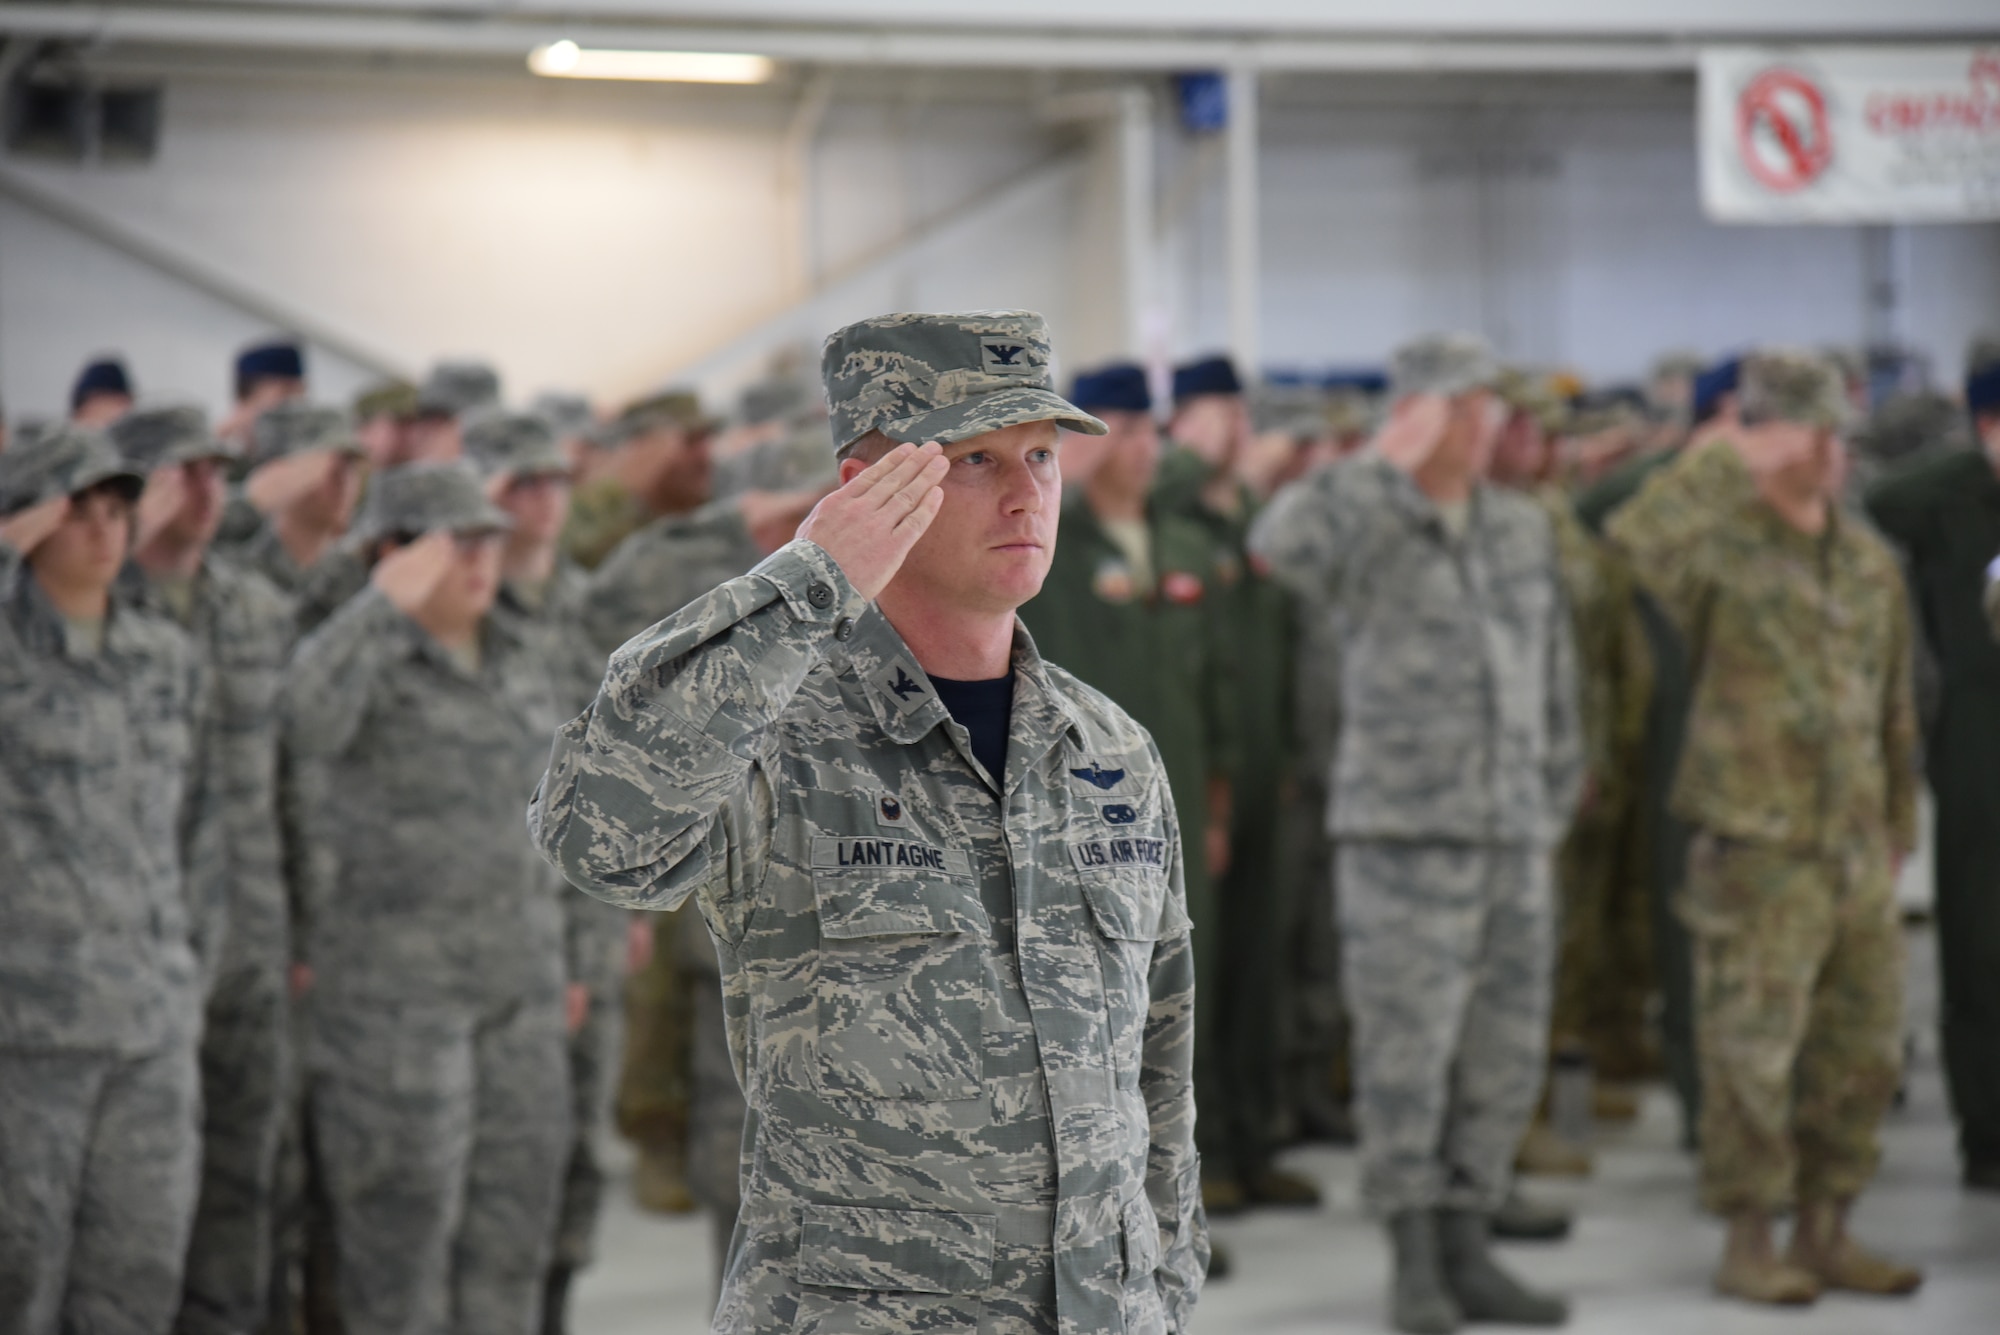 Oregon Air National Guard Col. Christopher Lantagne, 142nd Fighter Wing Maintenance Group commander, center, and other members of the 142nd Fighter Wing render their salute to the colors during the unit's Change of Command ceremony held Nov. 6, 2016, Portland Air National Guard Base, Ore. (U.S. Air National Guard photograph by Senior Master Sgt. Shelly Davison, 142nd Fighter Wing Public Affairs)